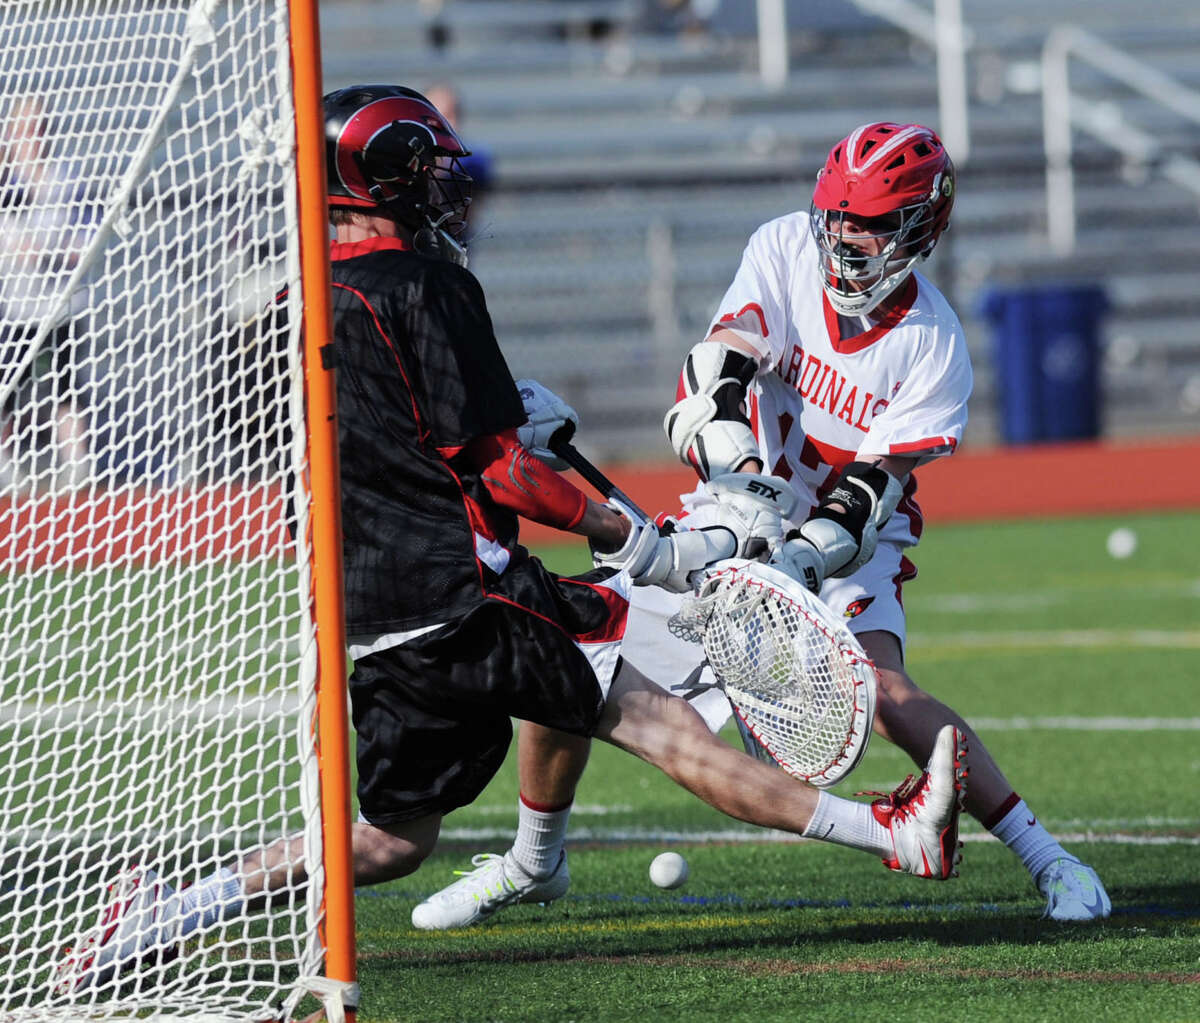 Bobby Goggin, right, of Greenwich, goes low with a shot that New Canaan goalie Trent Nader was able to block with his back leg during the high school lacrosse match between Greenwich High School and New Canaan High School at Greenwich, Thursday, May 1, 2014. Greenwich defeated New Canaan, 10-8.